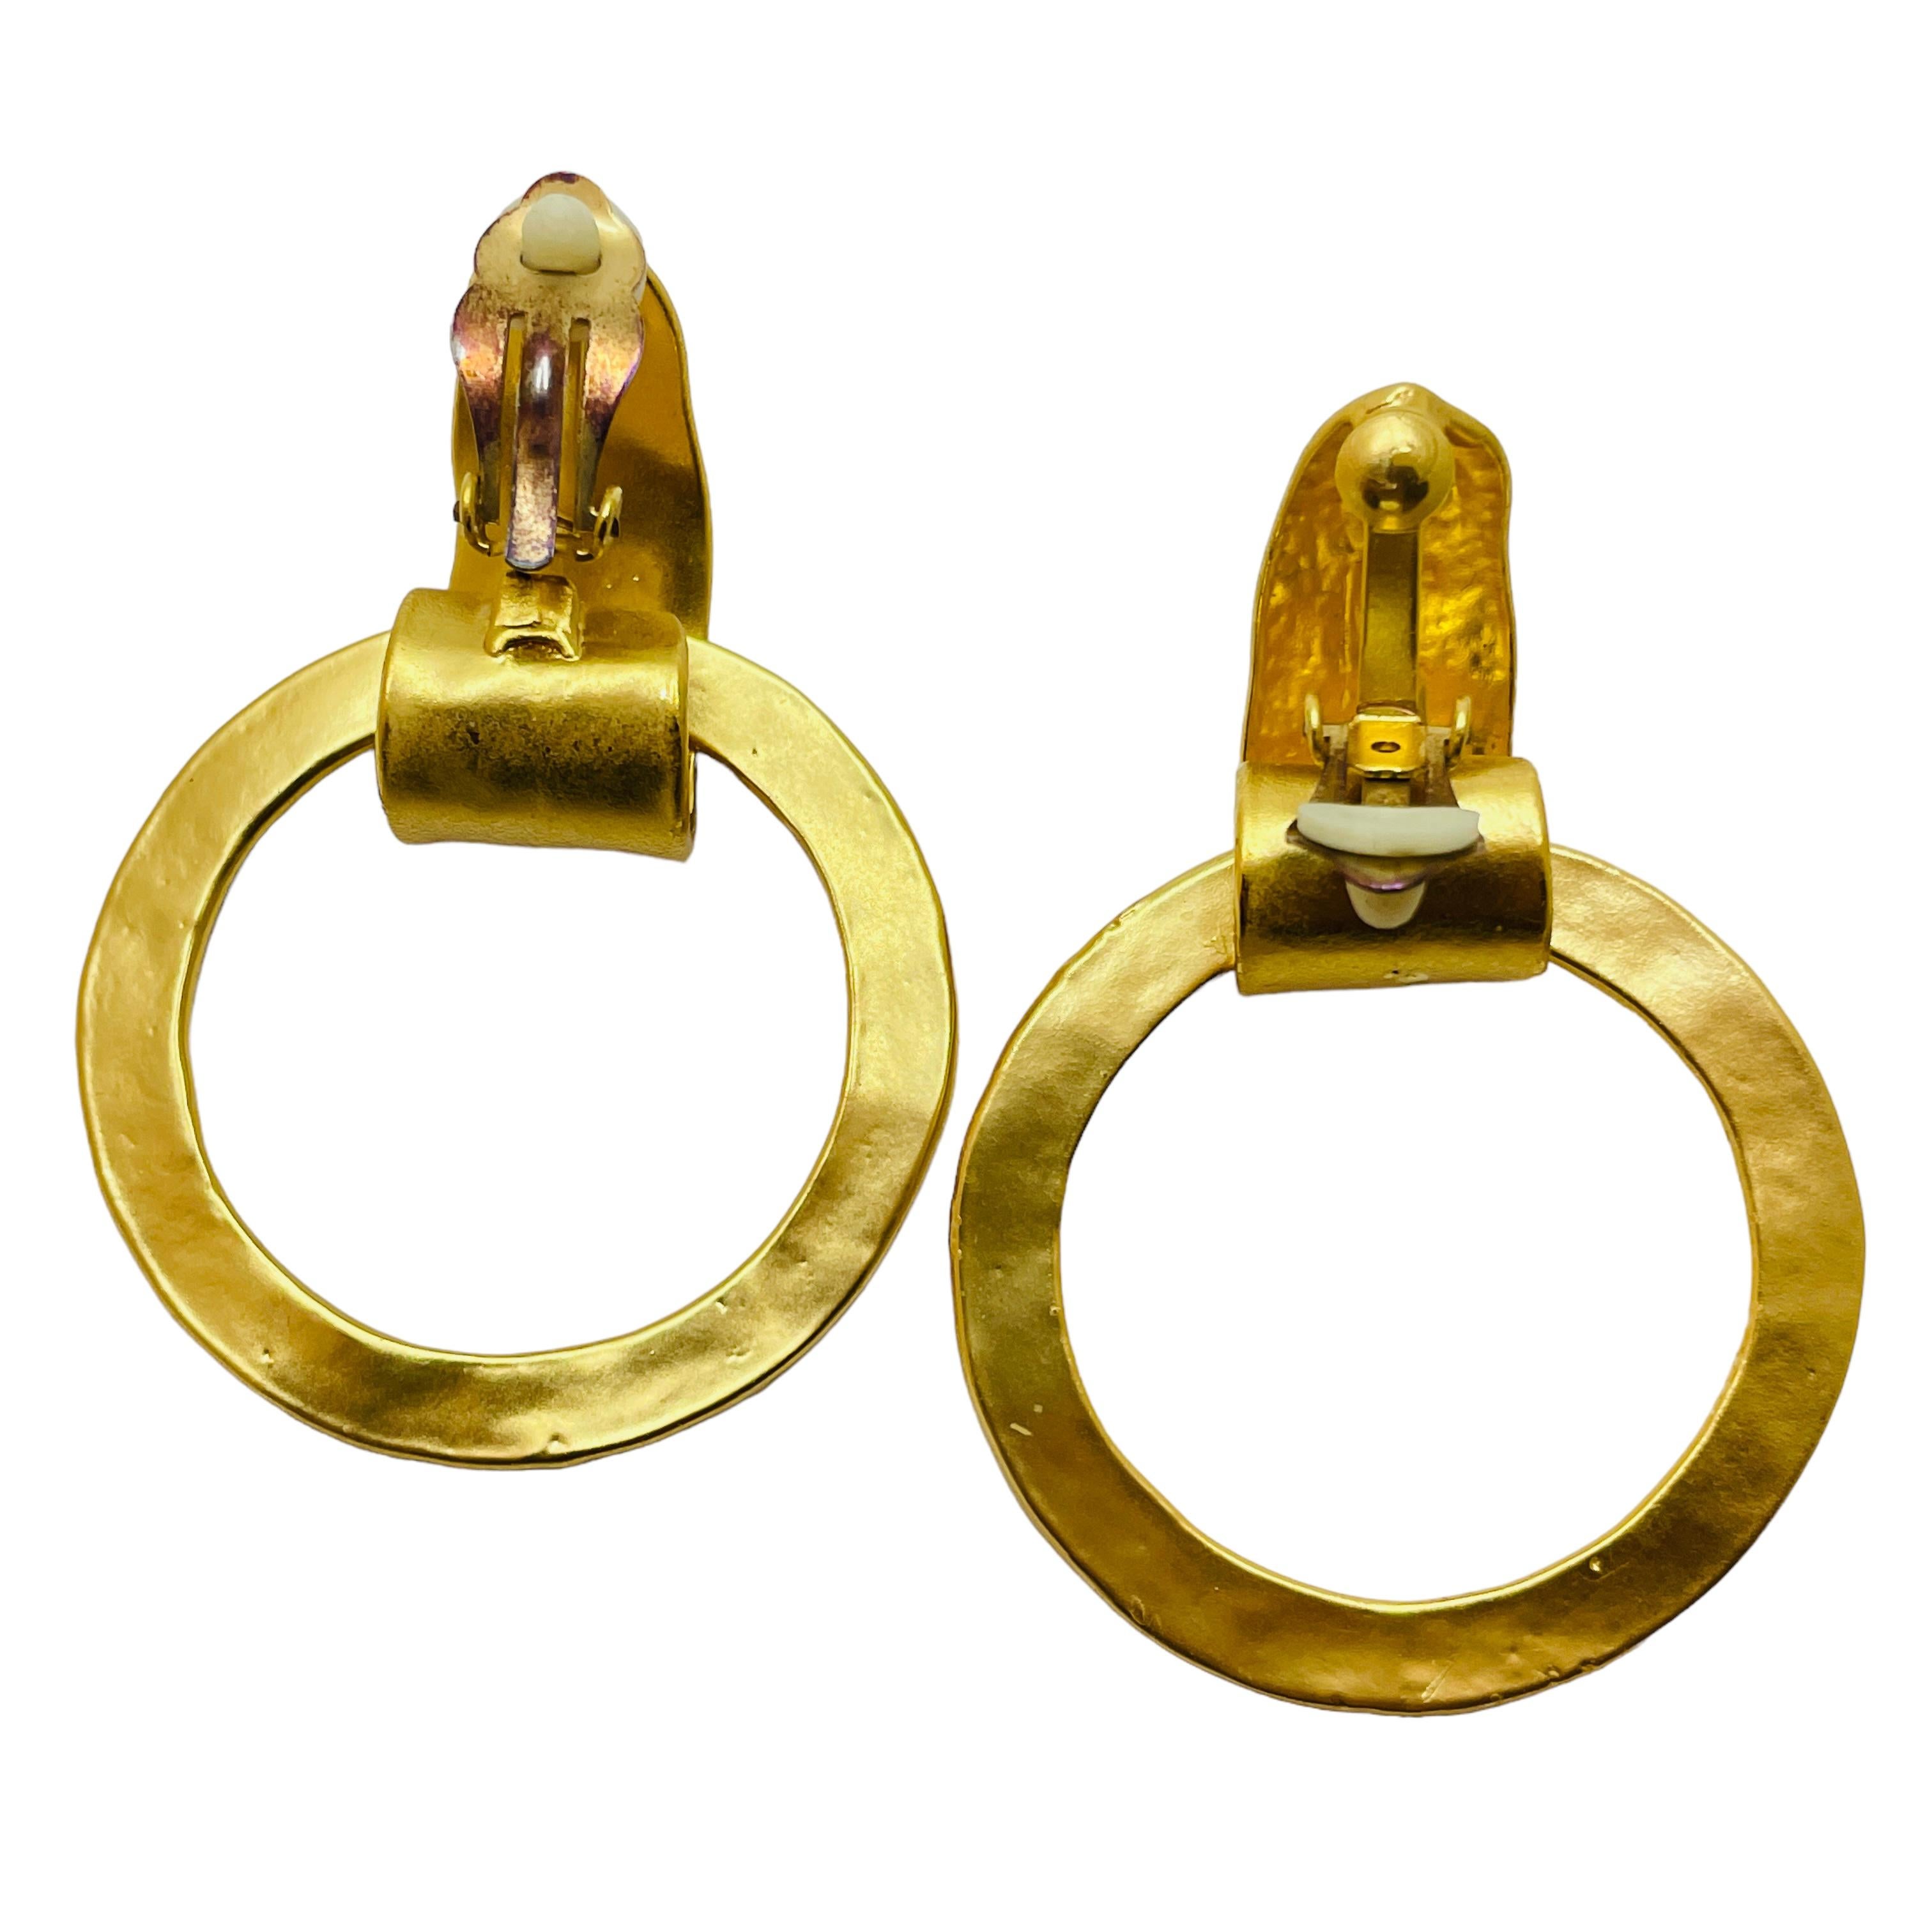 Vintage gold matte modernist door knocker clip on earrings In Excellent Condition For Sale In Palos Hills, IL